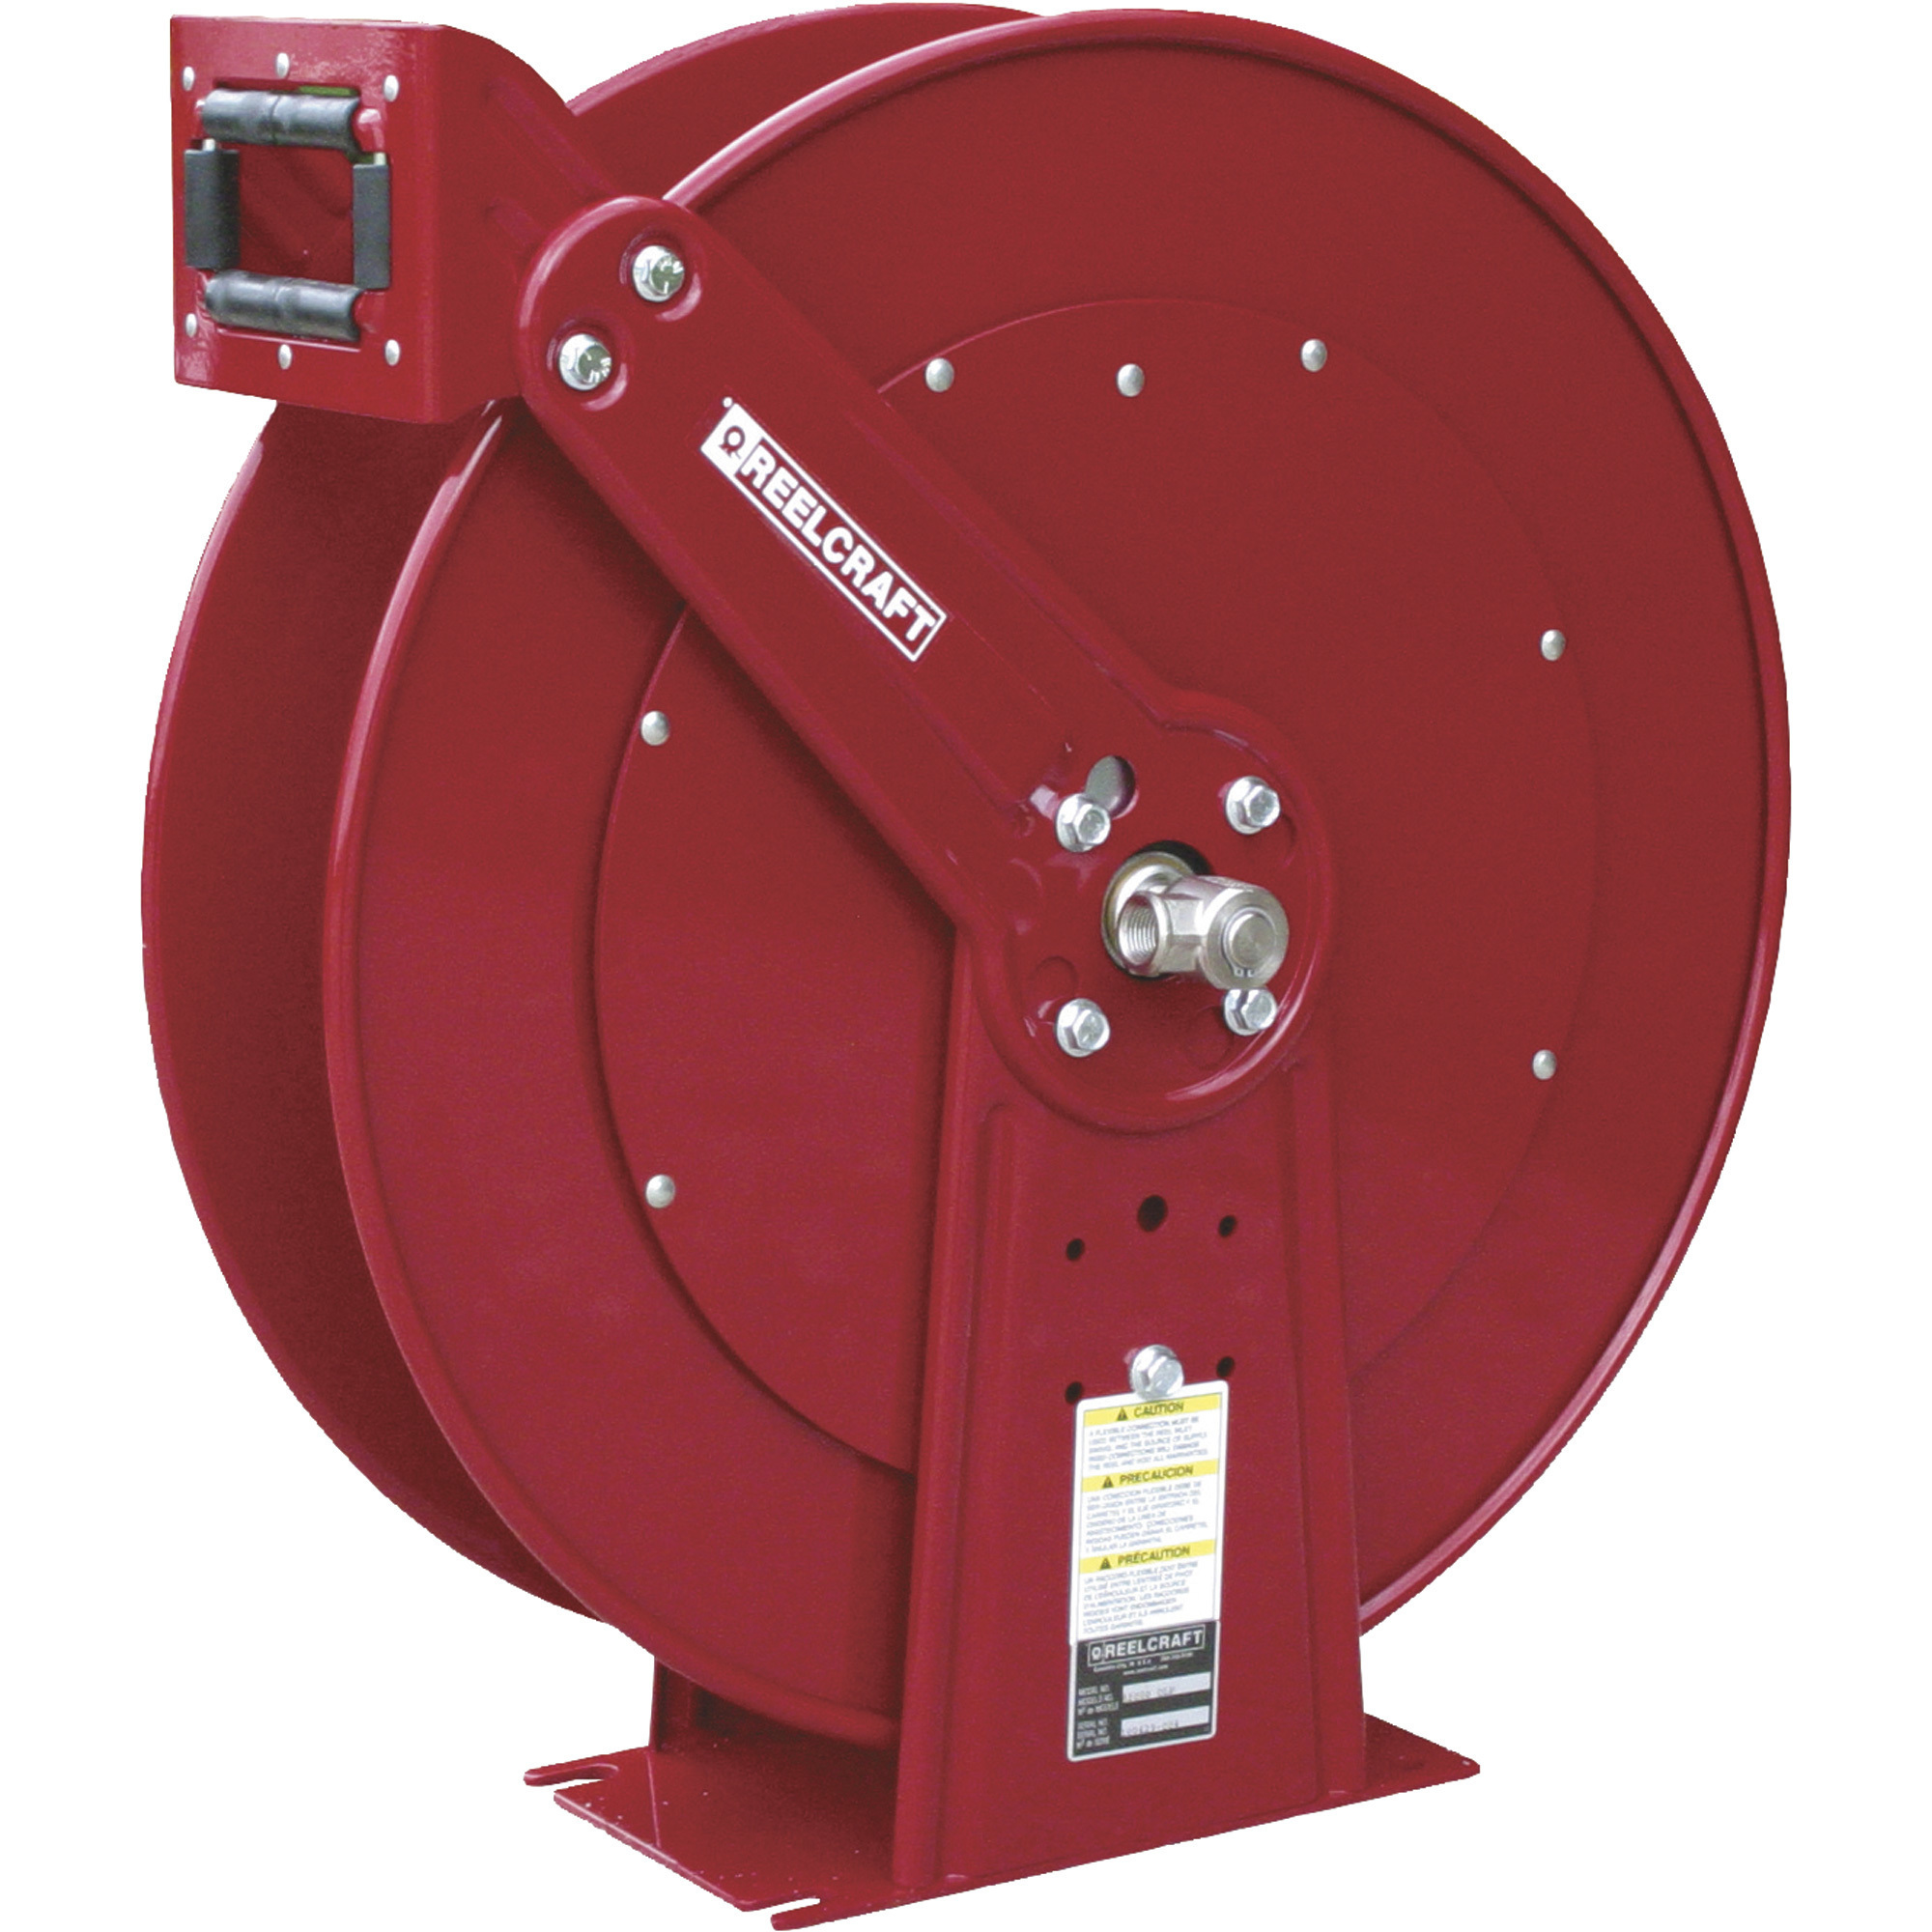 Hose Reel OR without hose with stainless steel swivel Oil/Air 20 m max  (without hose) - Alentec & Orion AB